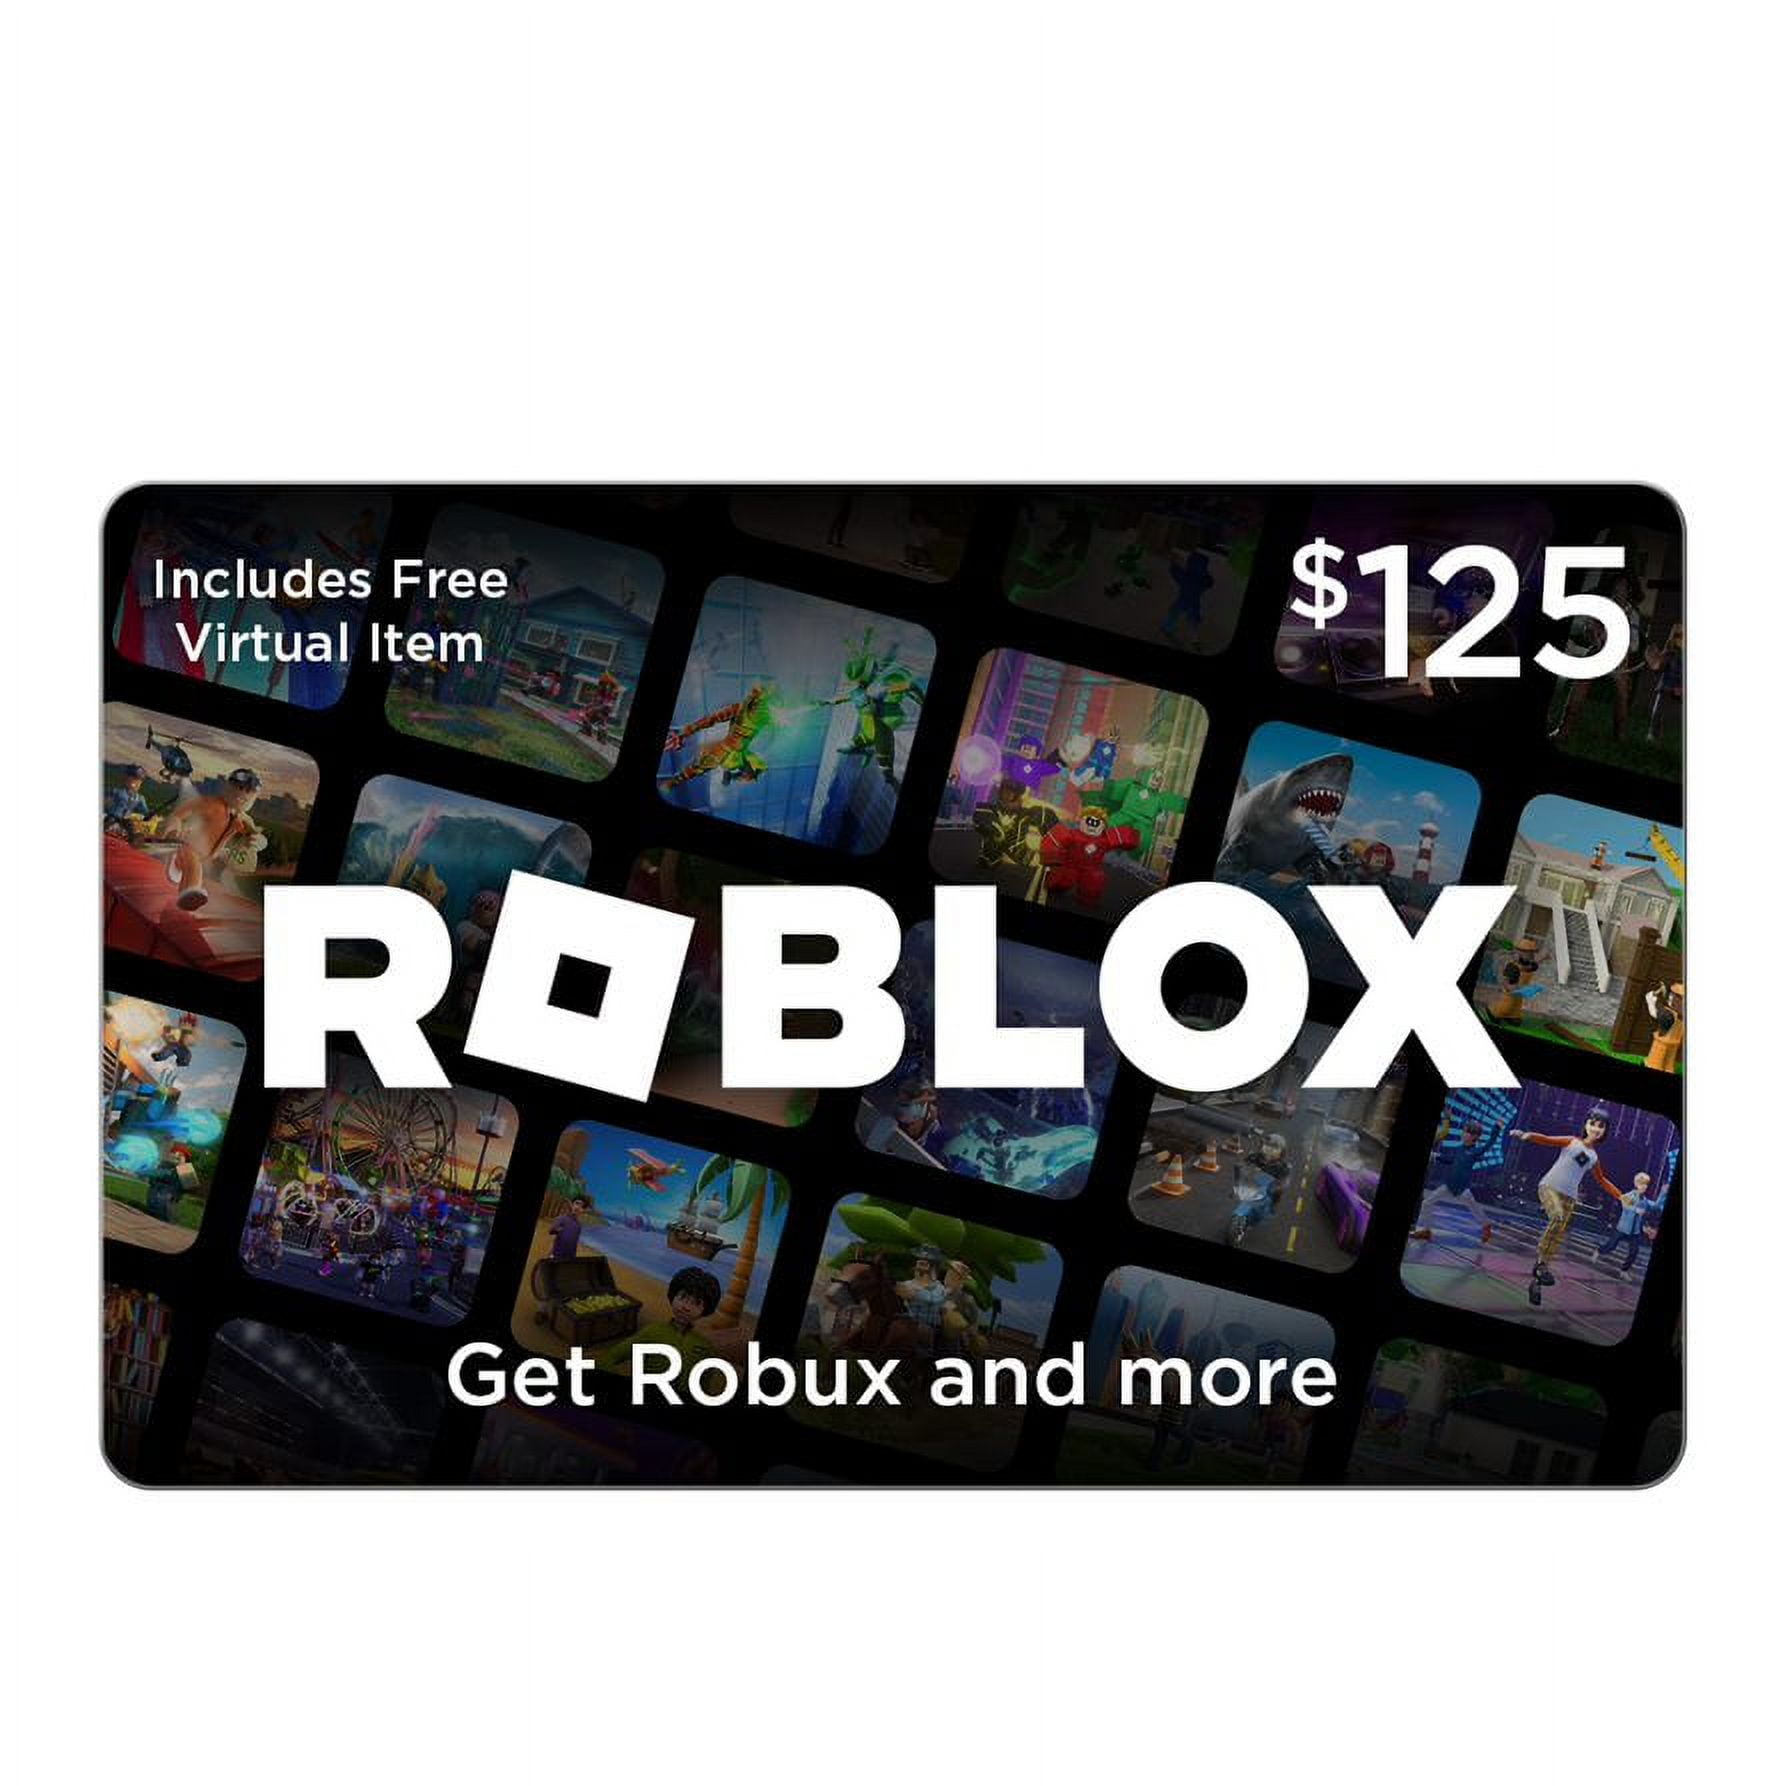 We wish you to buy Robux (x3) and more financial problems!